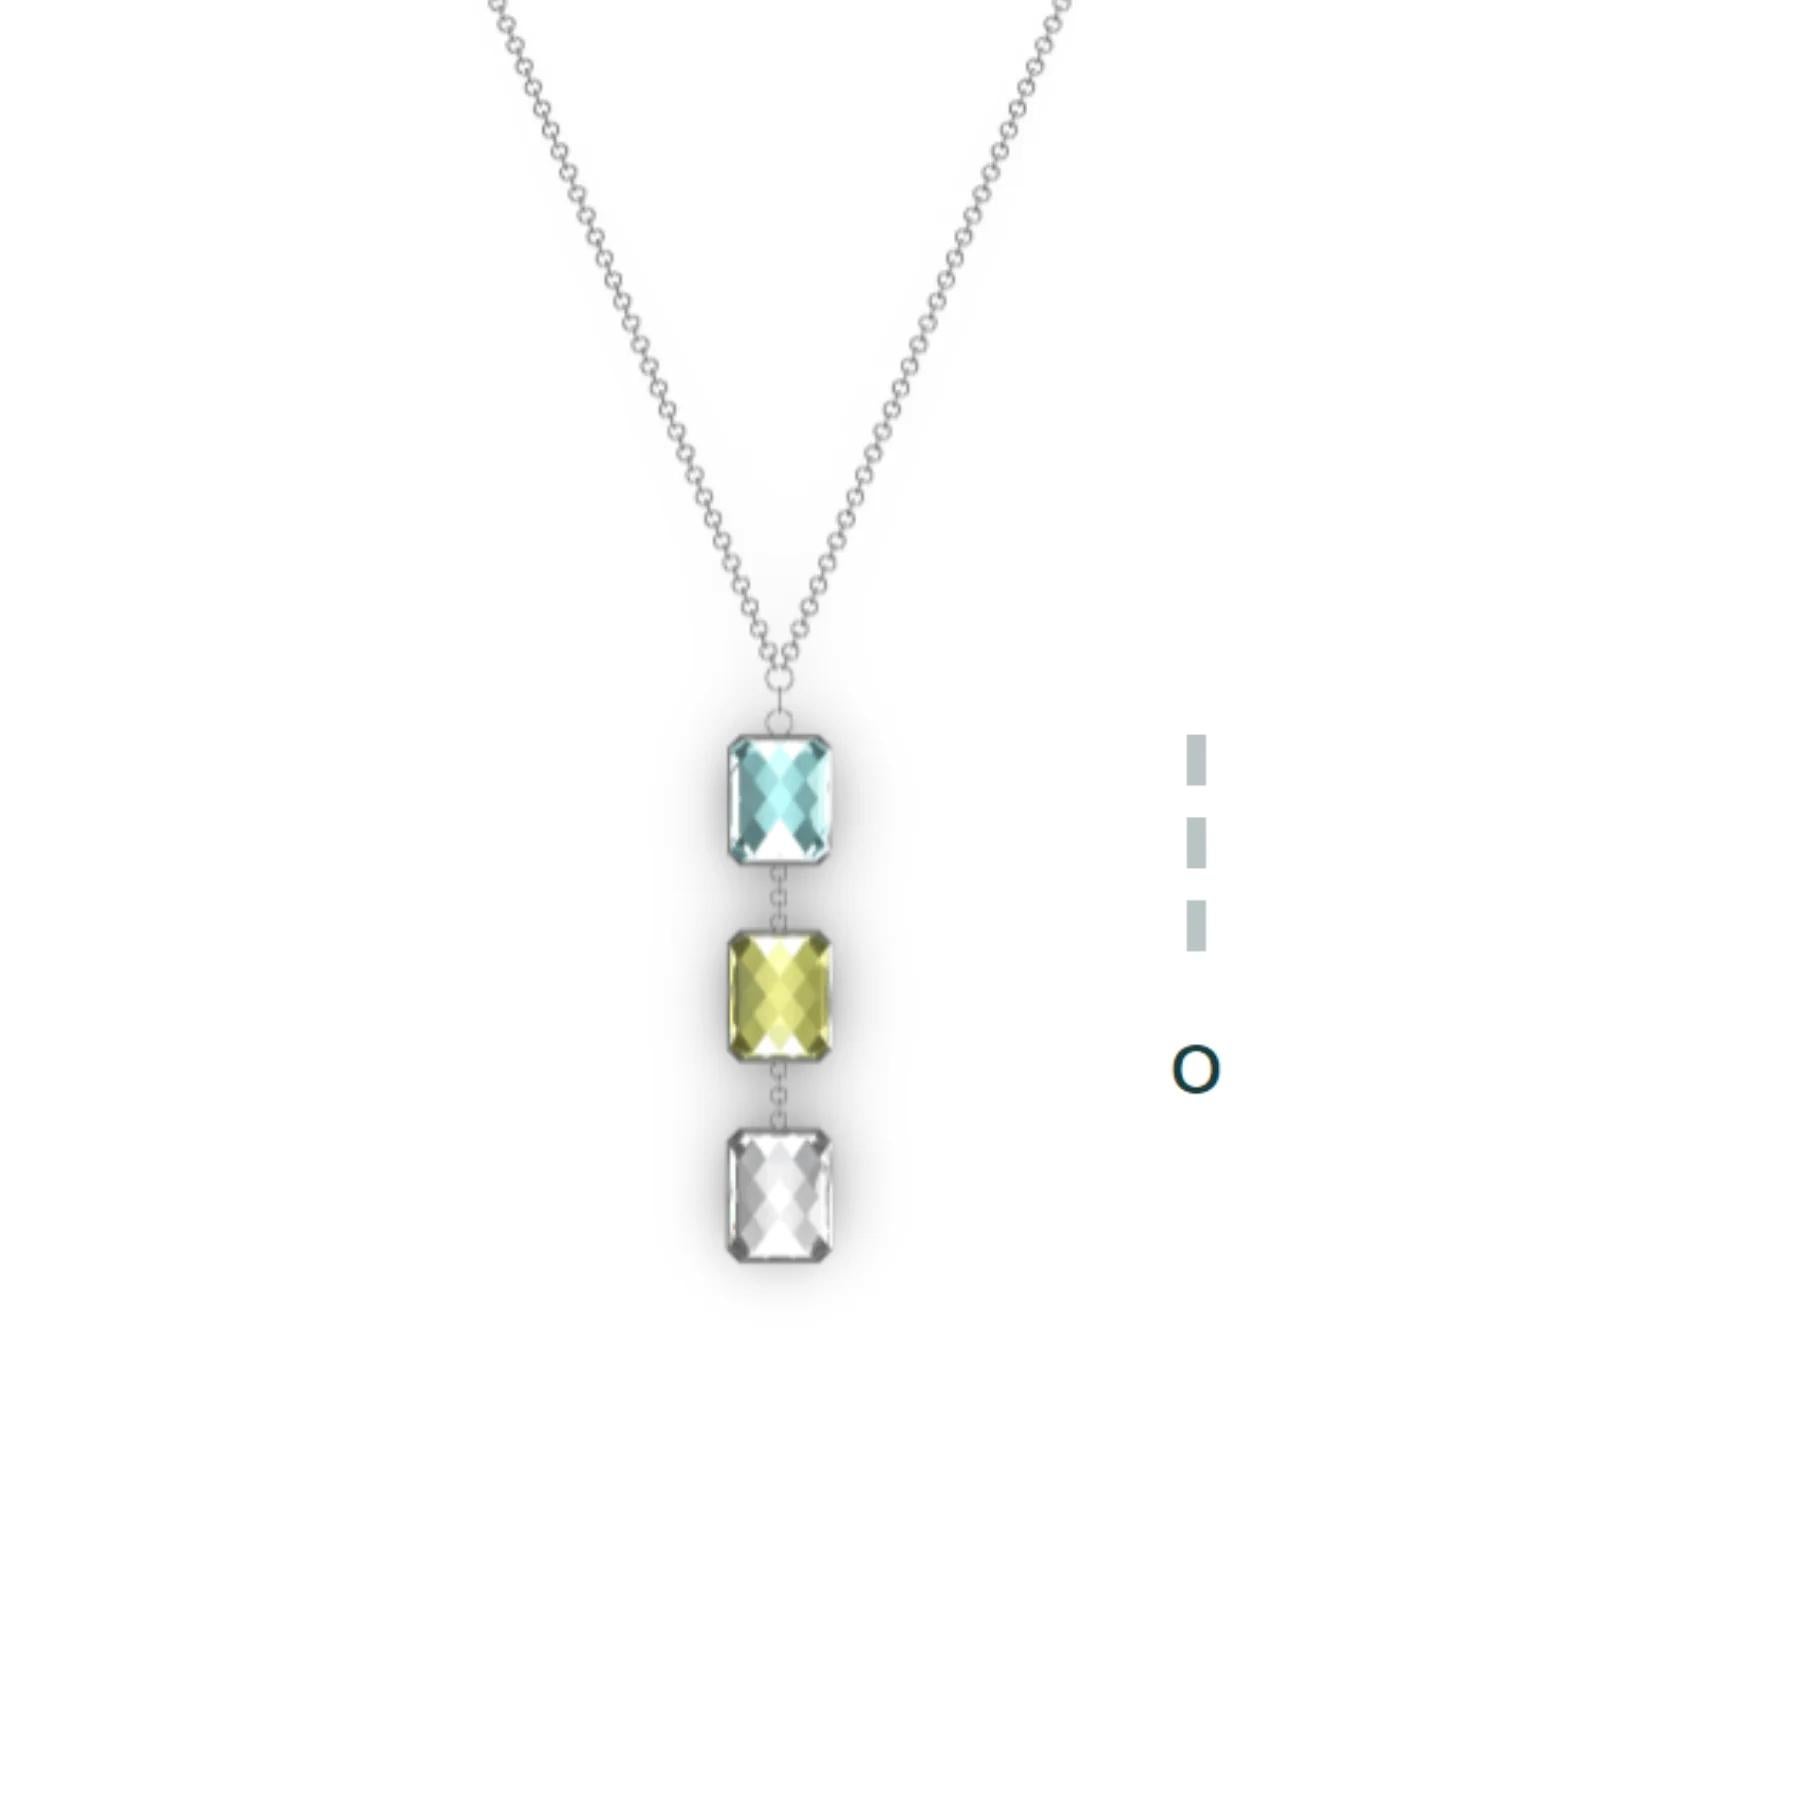 O is for Optimism, One and only, Oscar, XOXO… Encode the letters of your name, your children's initials, your lucky numbers, or a secret message of inspiration.

Details of this piece:
Handcrafted
Recycled 925 sterling silver

About Us
In the